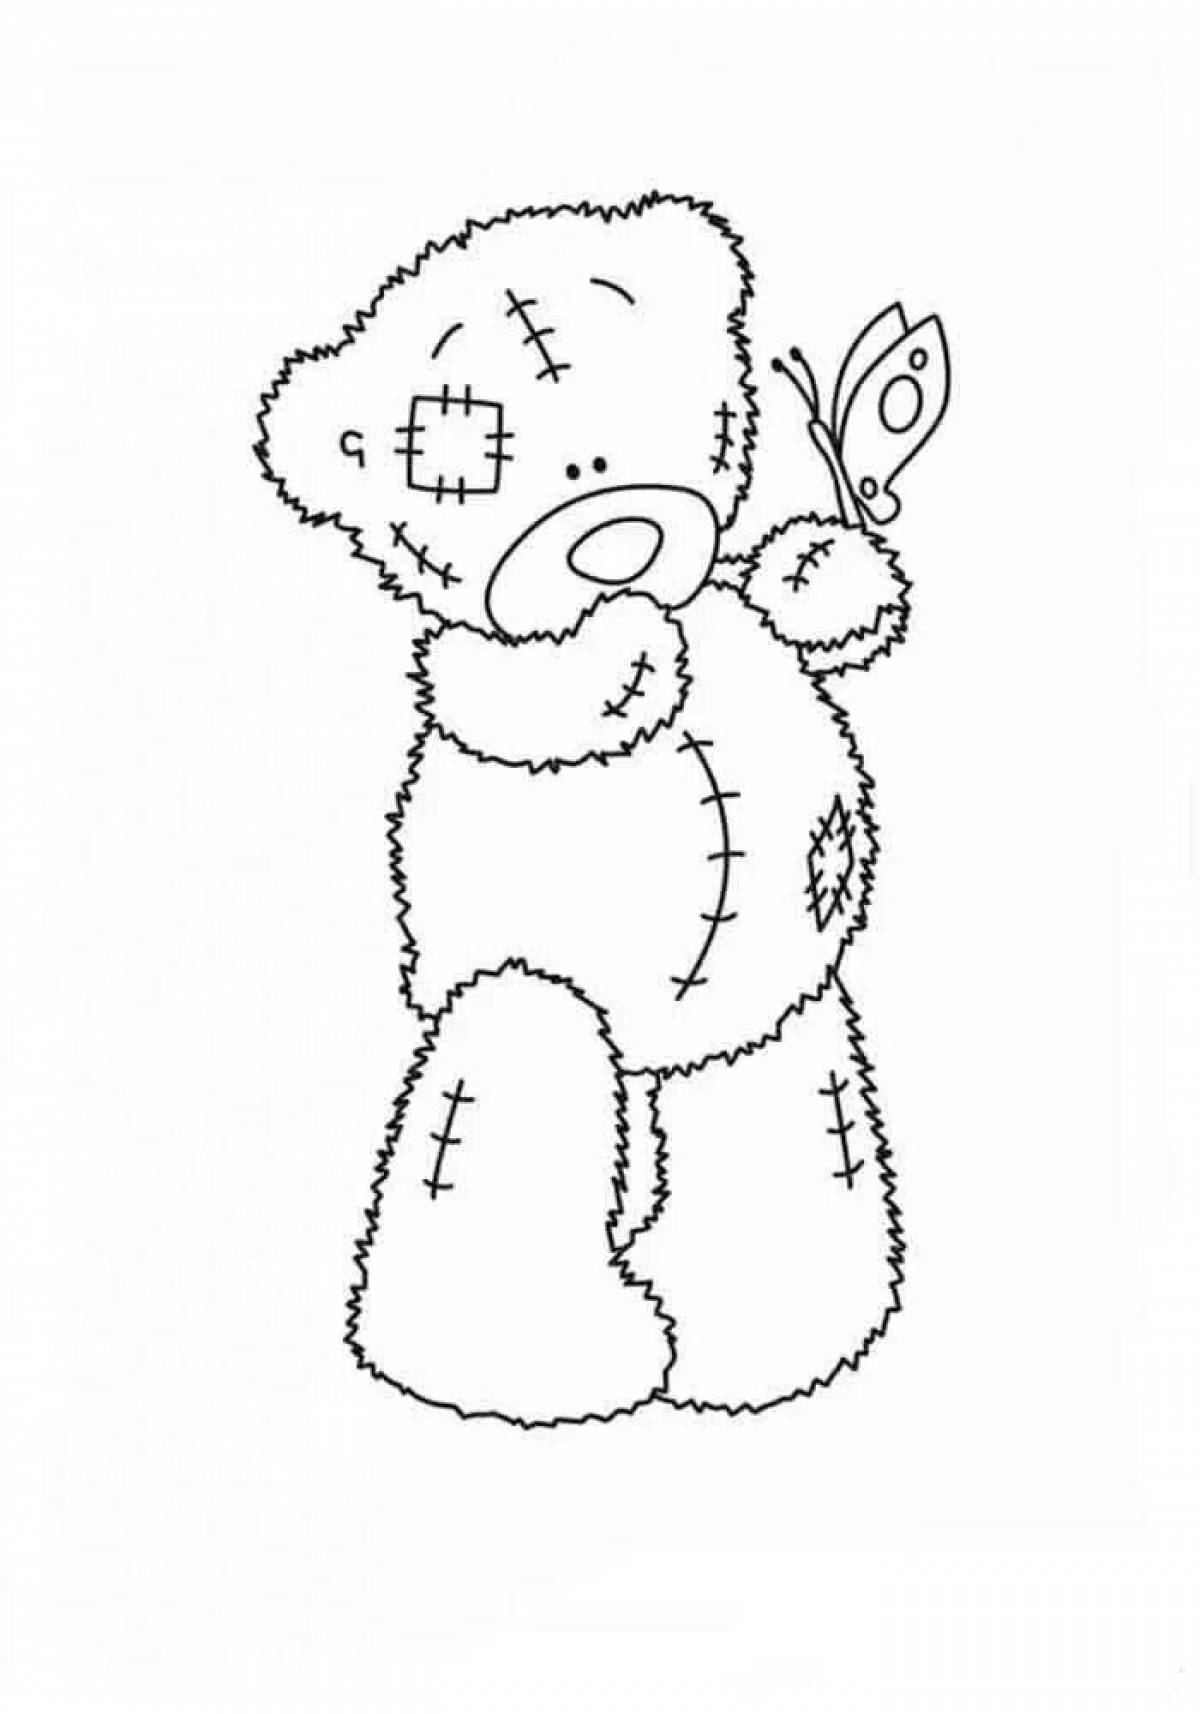 Animated drawing of a teddy bear